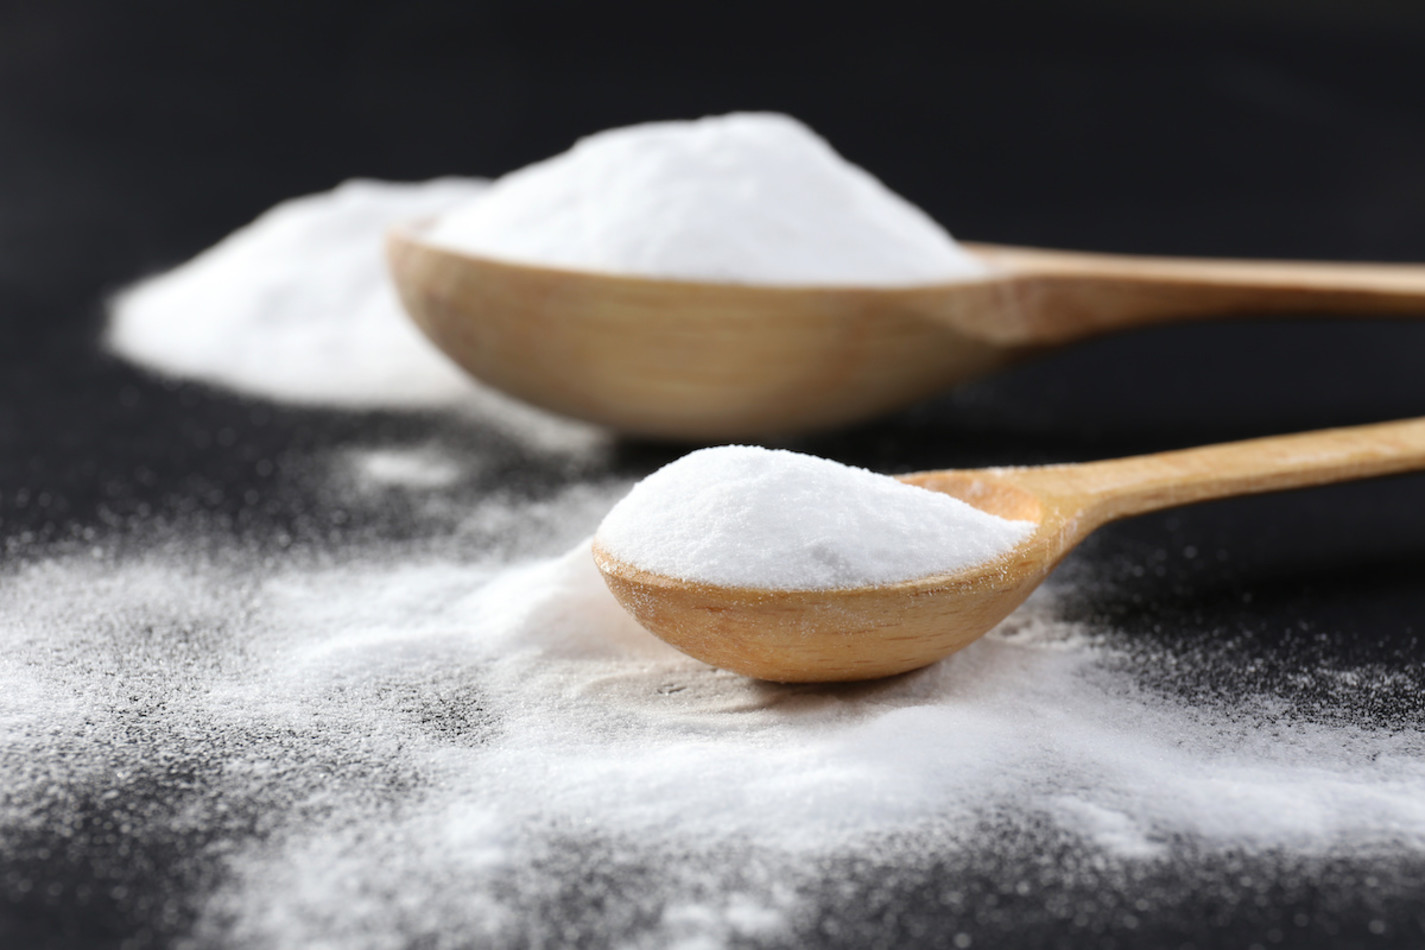 Baking Soda vs. Baking Powder - What's the Difference?, Cooking School